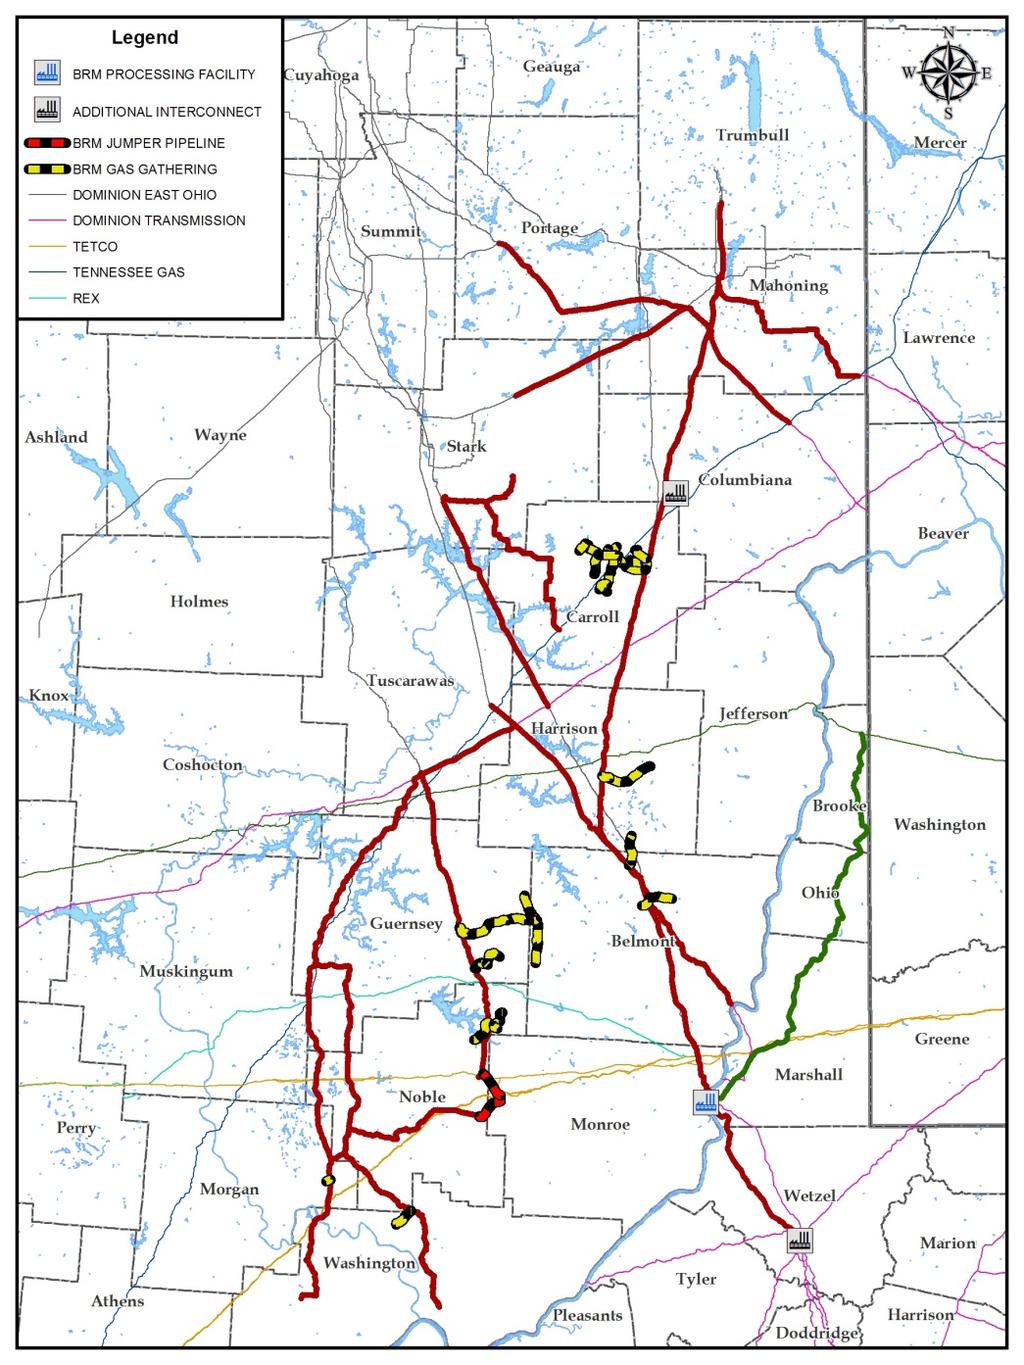 Approved Gathering Expansions BRM has approved acquisition, construction, and associated funding Approved Drop Downs from Dominion Western System (Q4 2014) 214 miles of 8 to 16 Operates 300 to 500